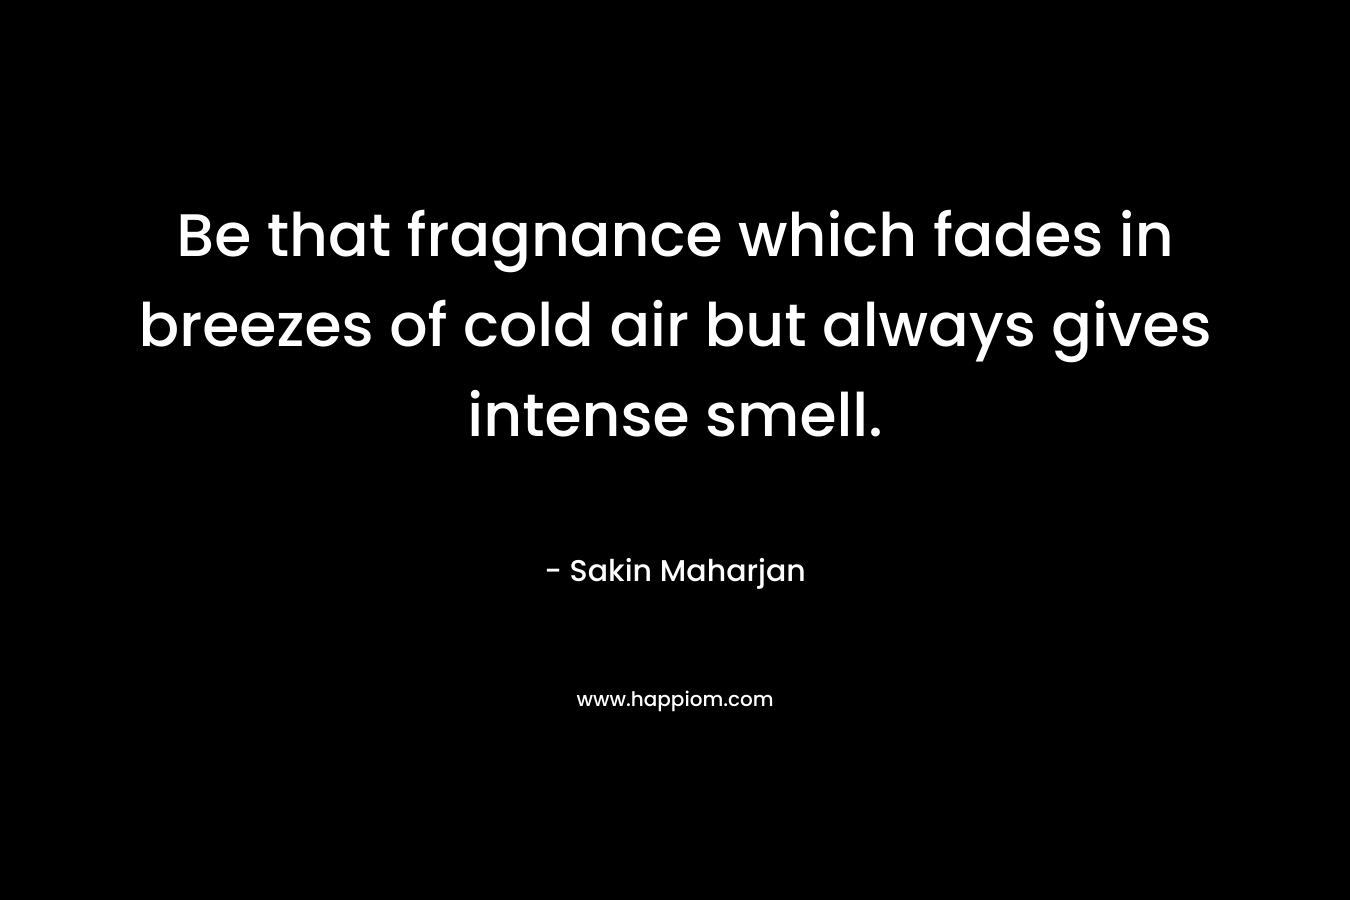 Be that fragnance which fades in breezes of cold air but always gives intense smell.